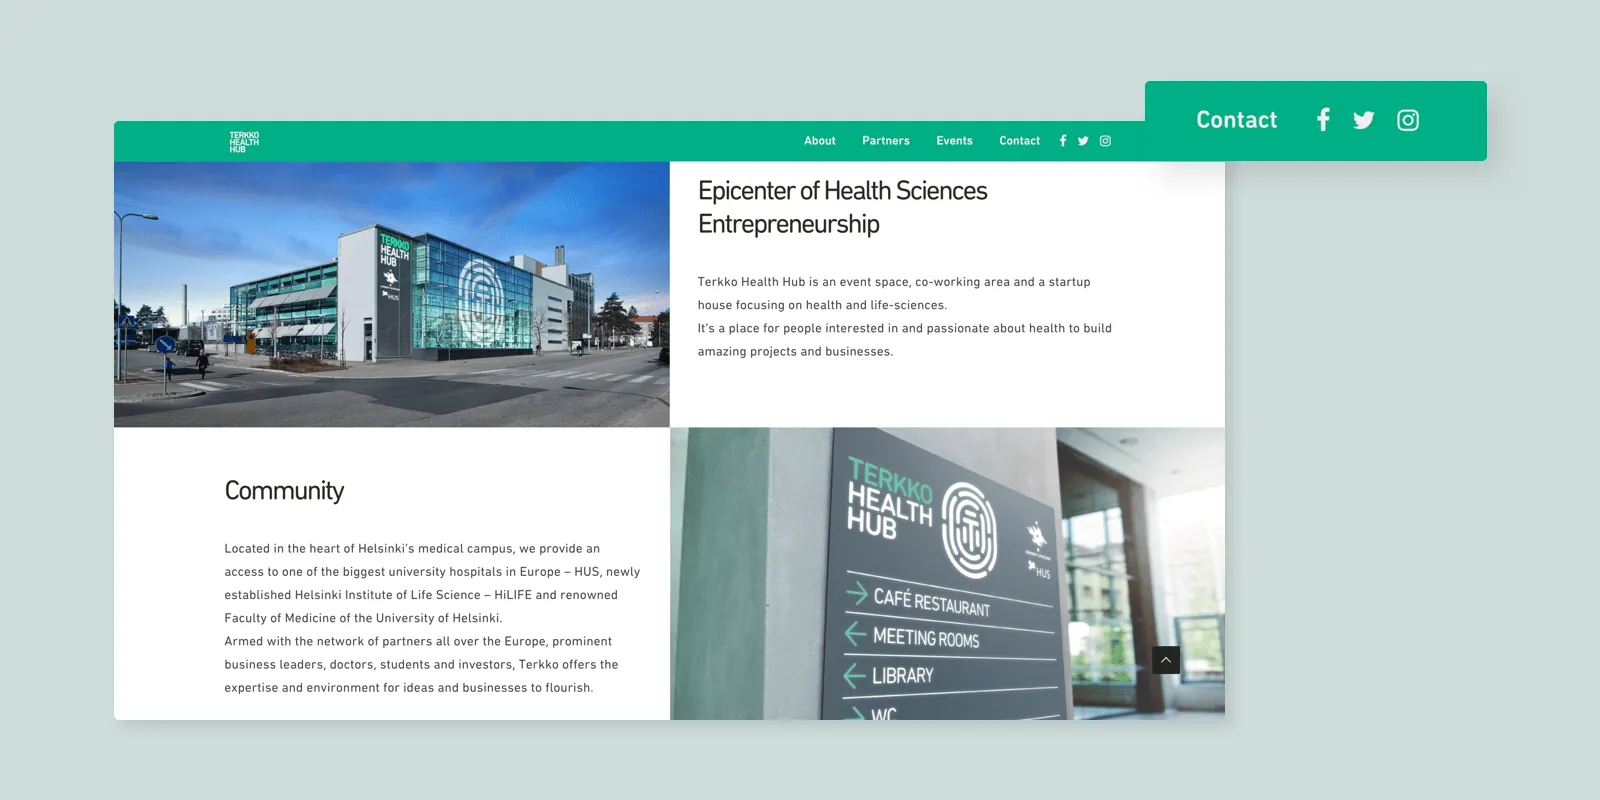 Terkko Health Hub contact page - coworking space